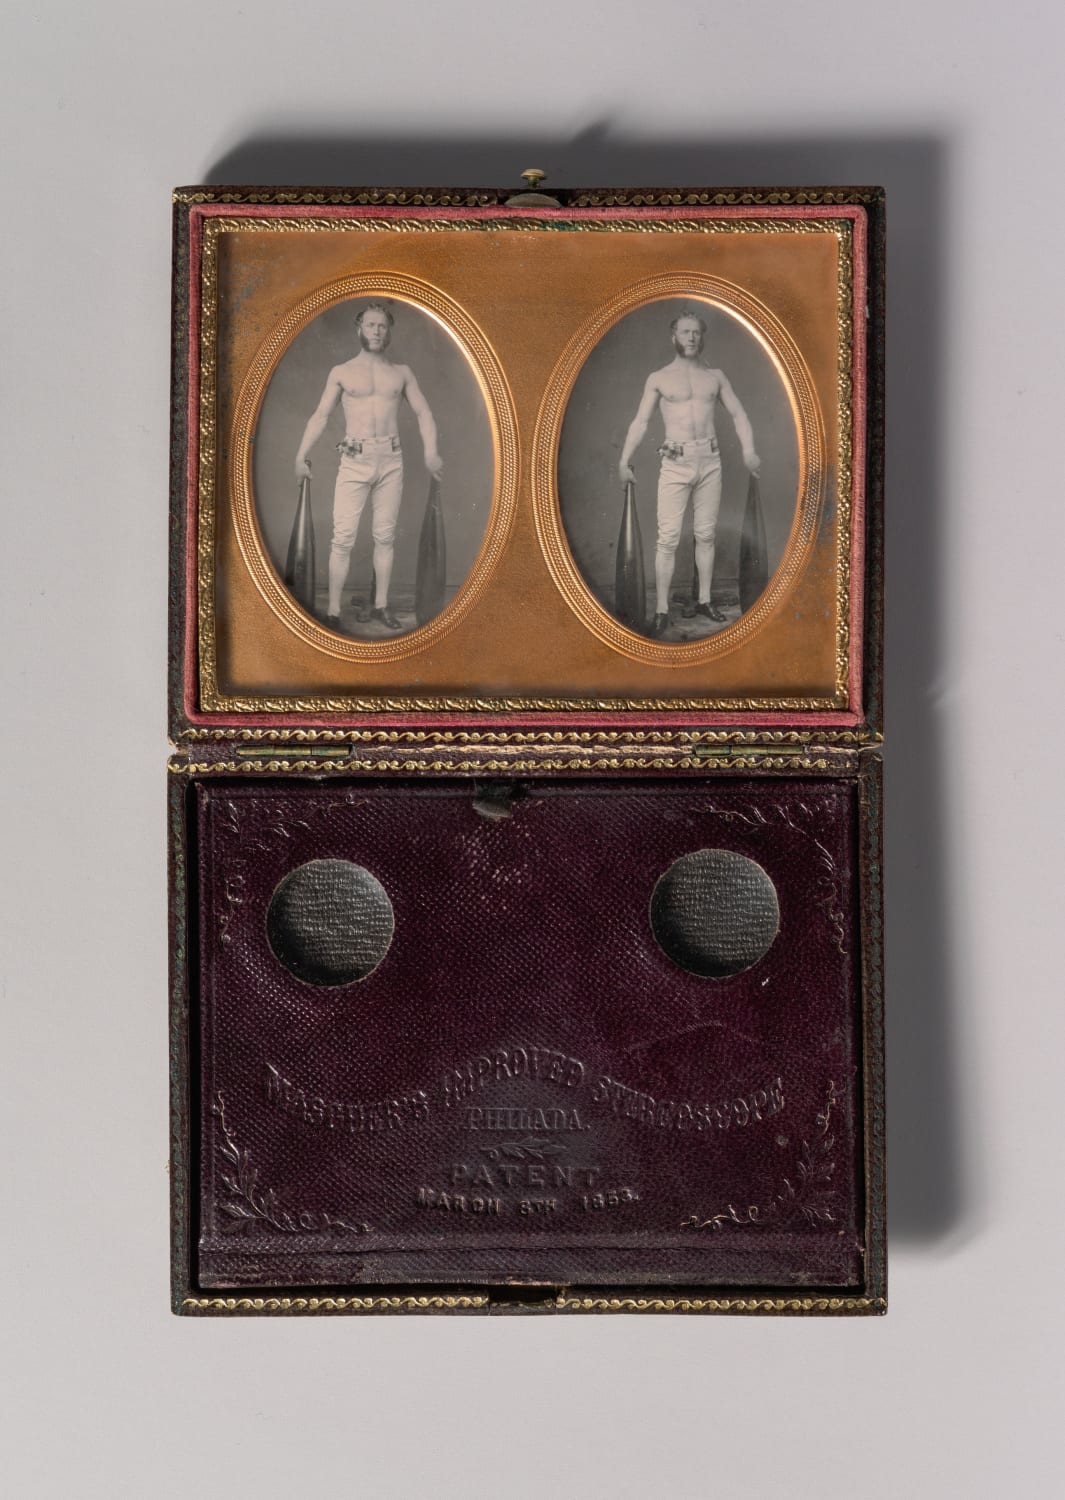 Cased stereoscopic daguerreotype photos of a strongman entertainer posing with two Indian clubs, c. 1850s. The case also has a built-in Mascher stereoscope viewer.